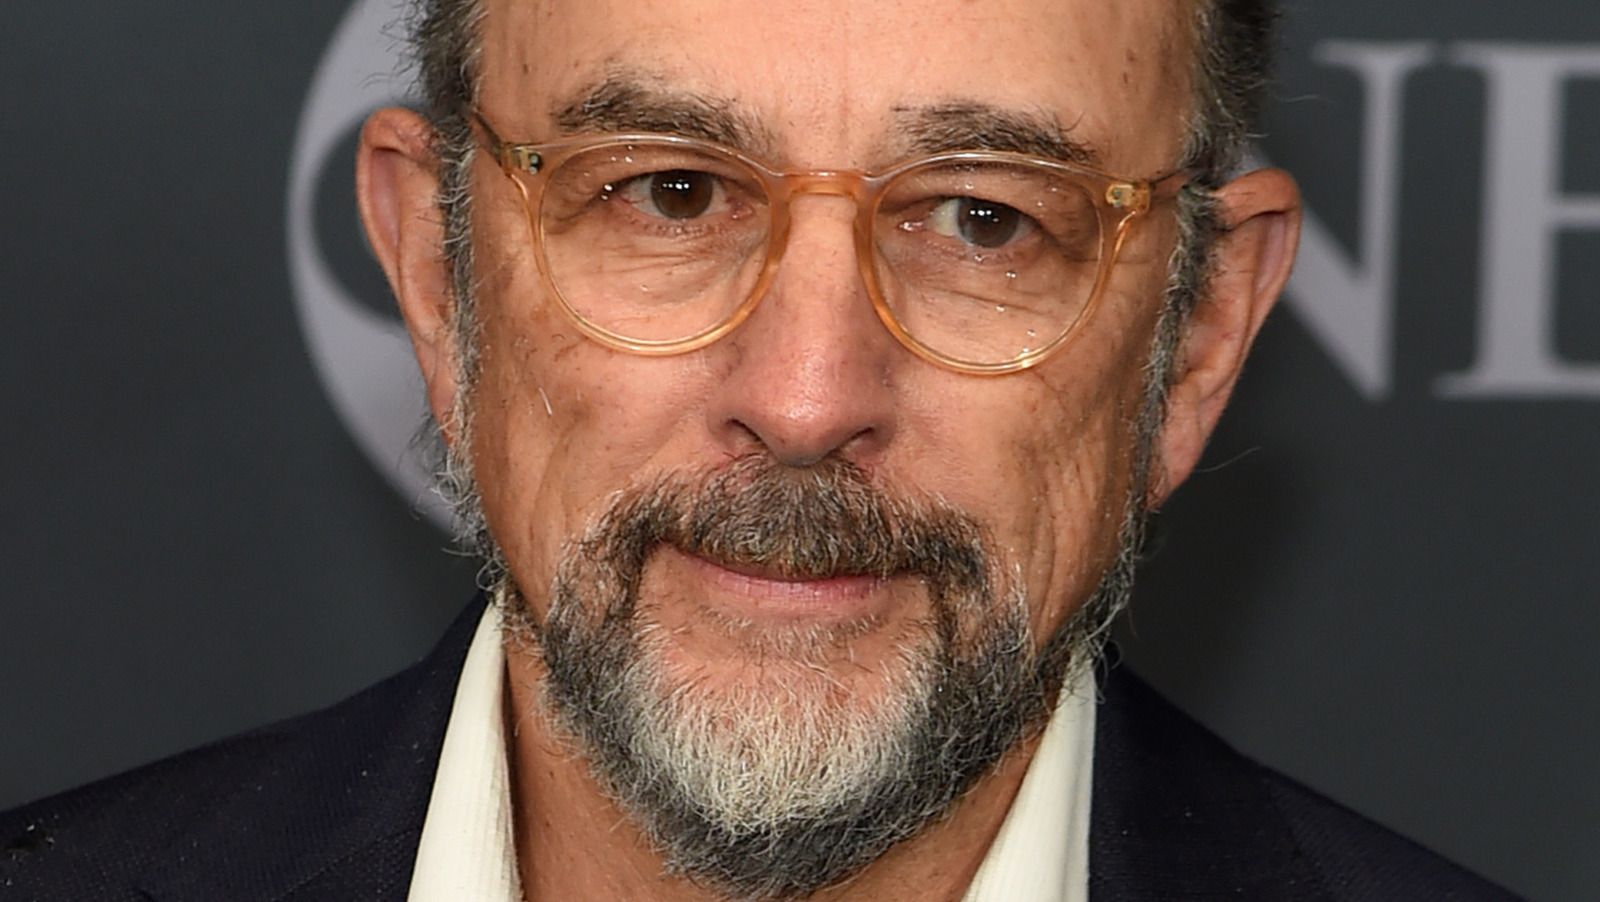 I know it was only a few lines, but I can already tell Odin is going to be  an amazing villain. In a few seconds, the voice actor Richard Schiff has  already